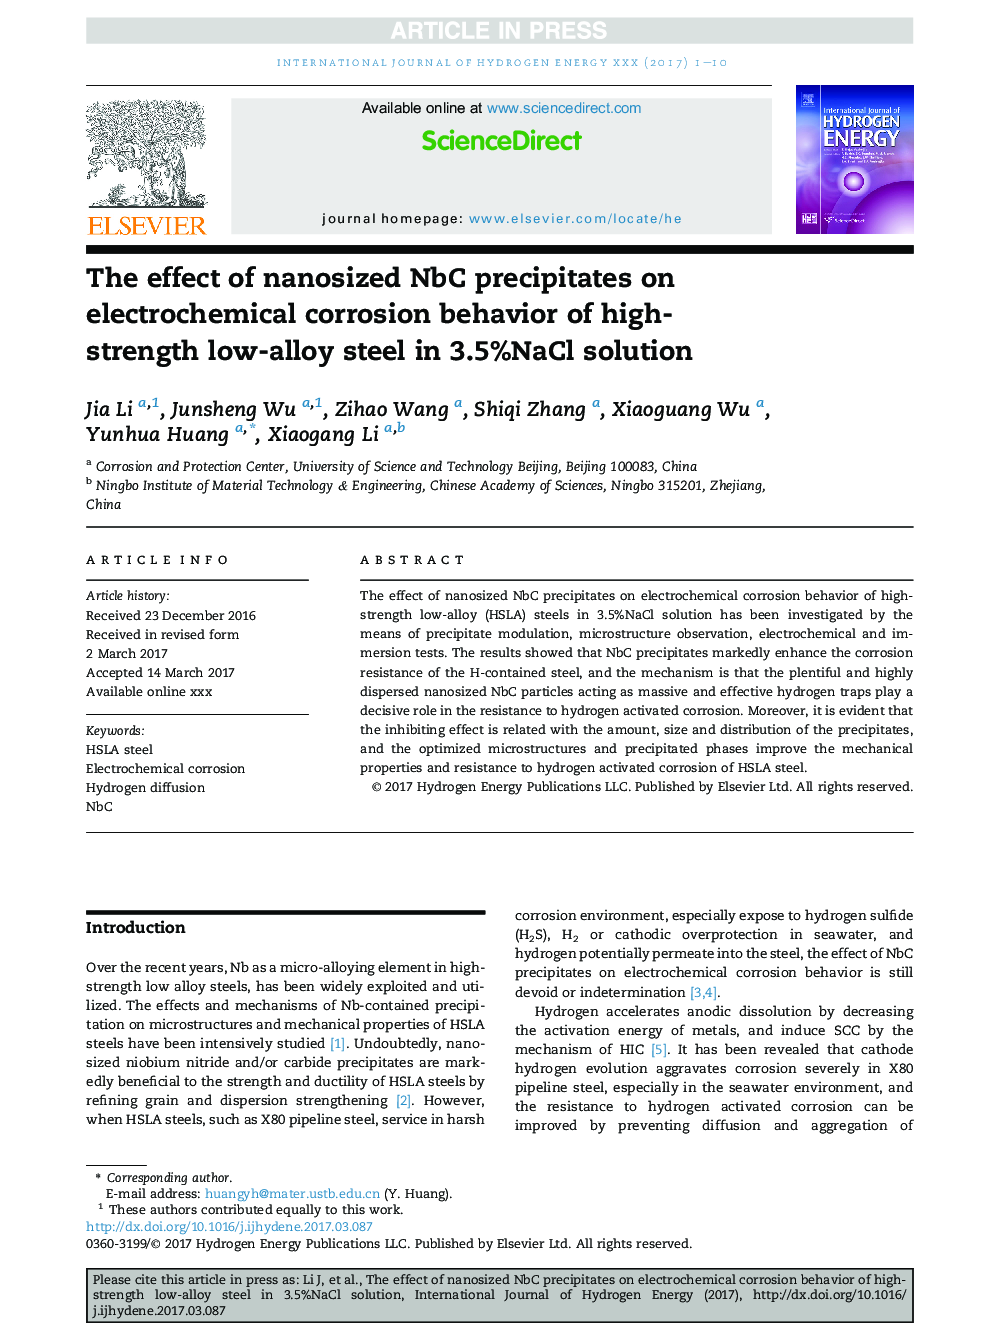 The effect of nanosized NbC precipitates on electrochemical corrosion behavior of high-strength low-alloy steel in 3.5%NaCl solution